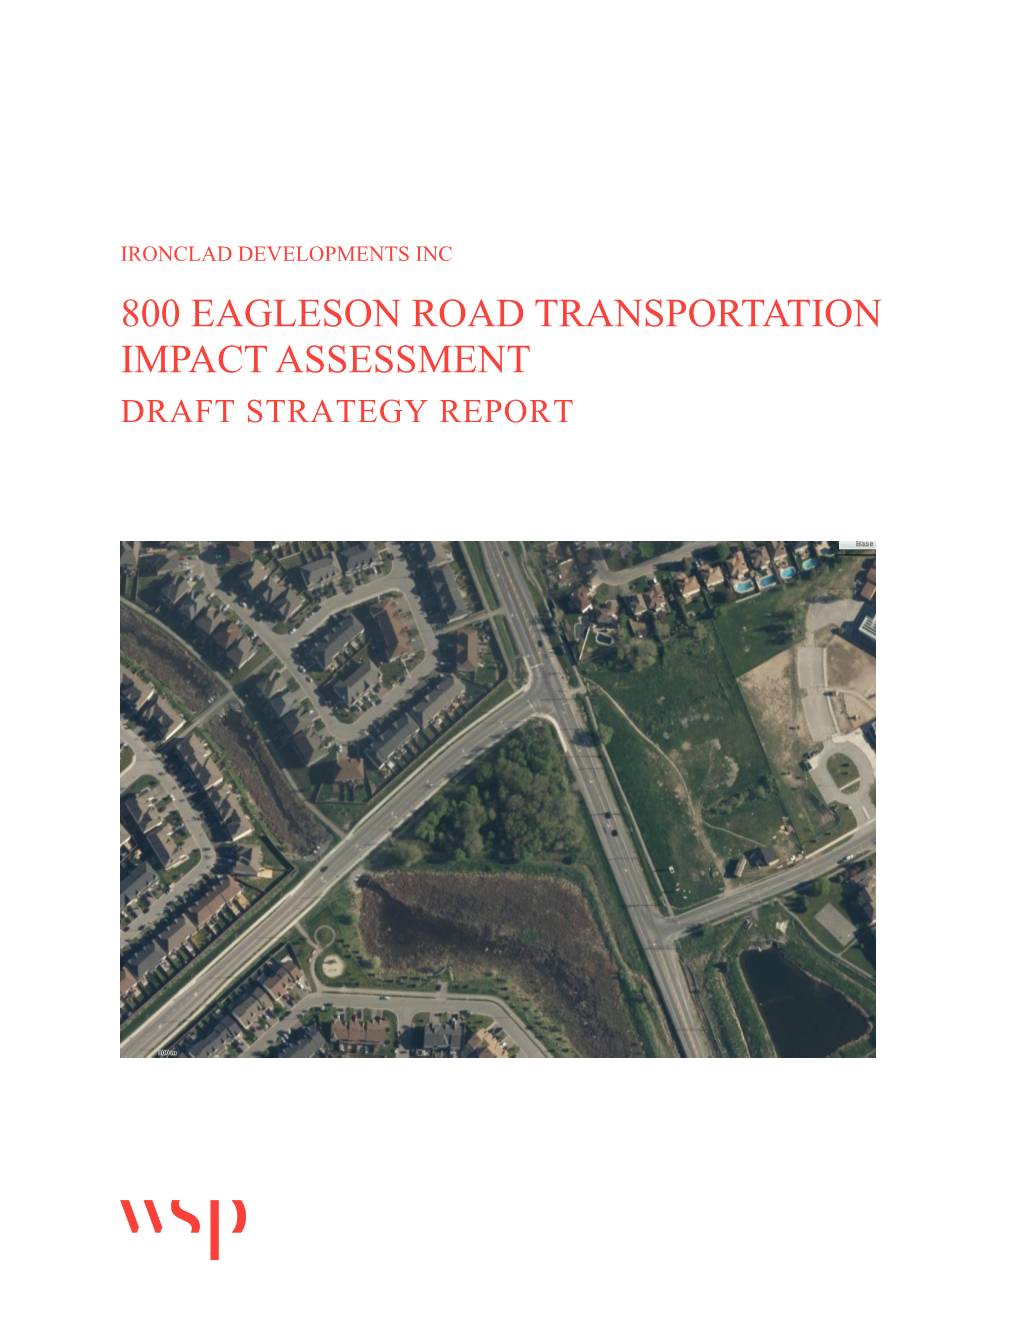 800 Eagleson Road Transportation Impact Assessment Draft Strategy Report